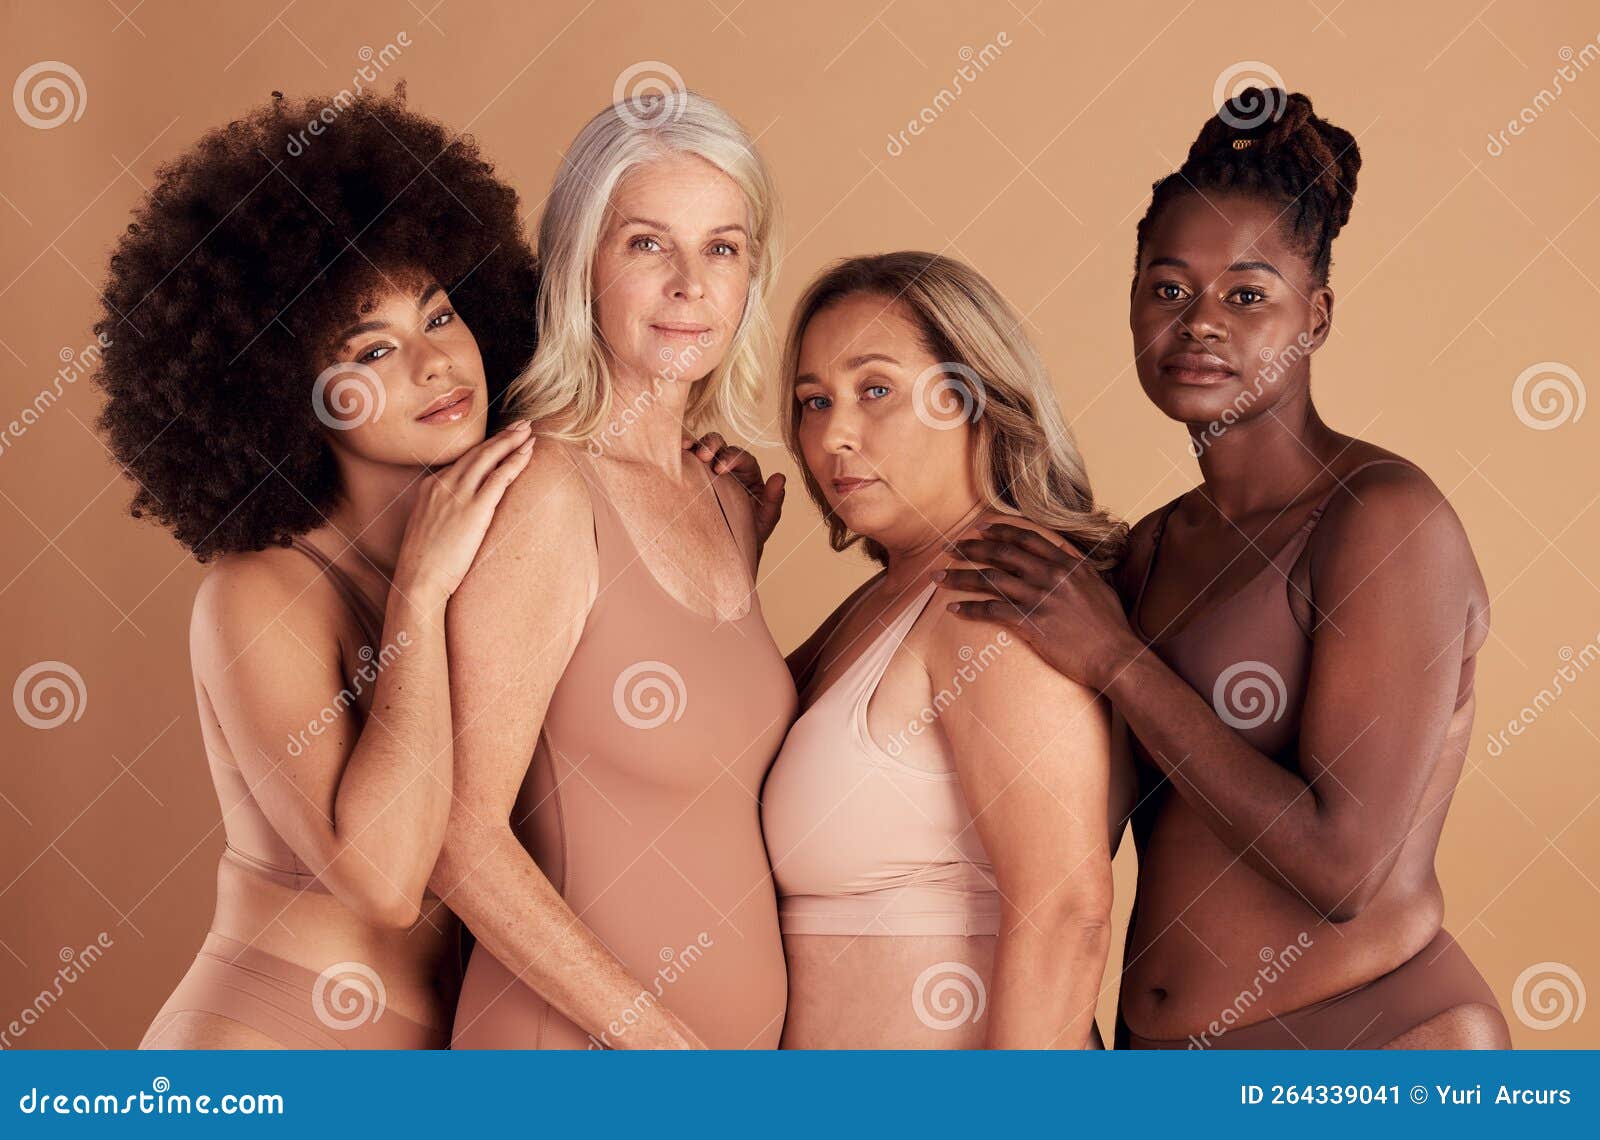 524 Group Women Lingerie Stock Photos - Free & Royalty-Free